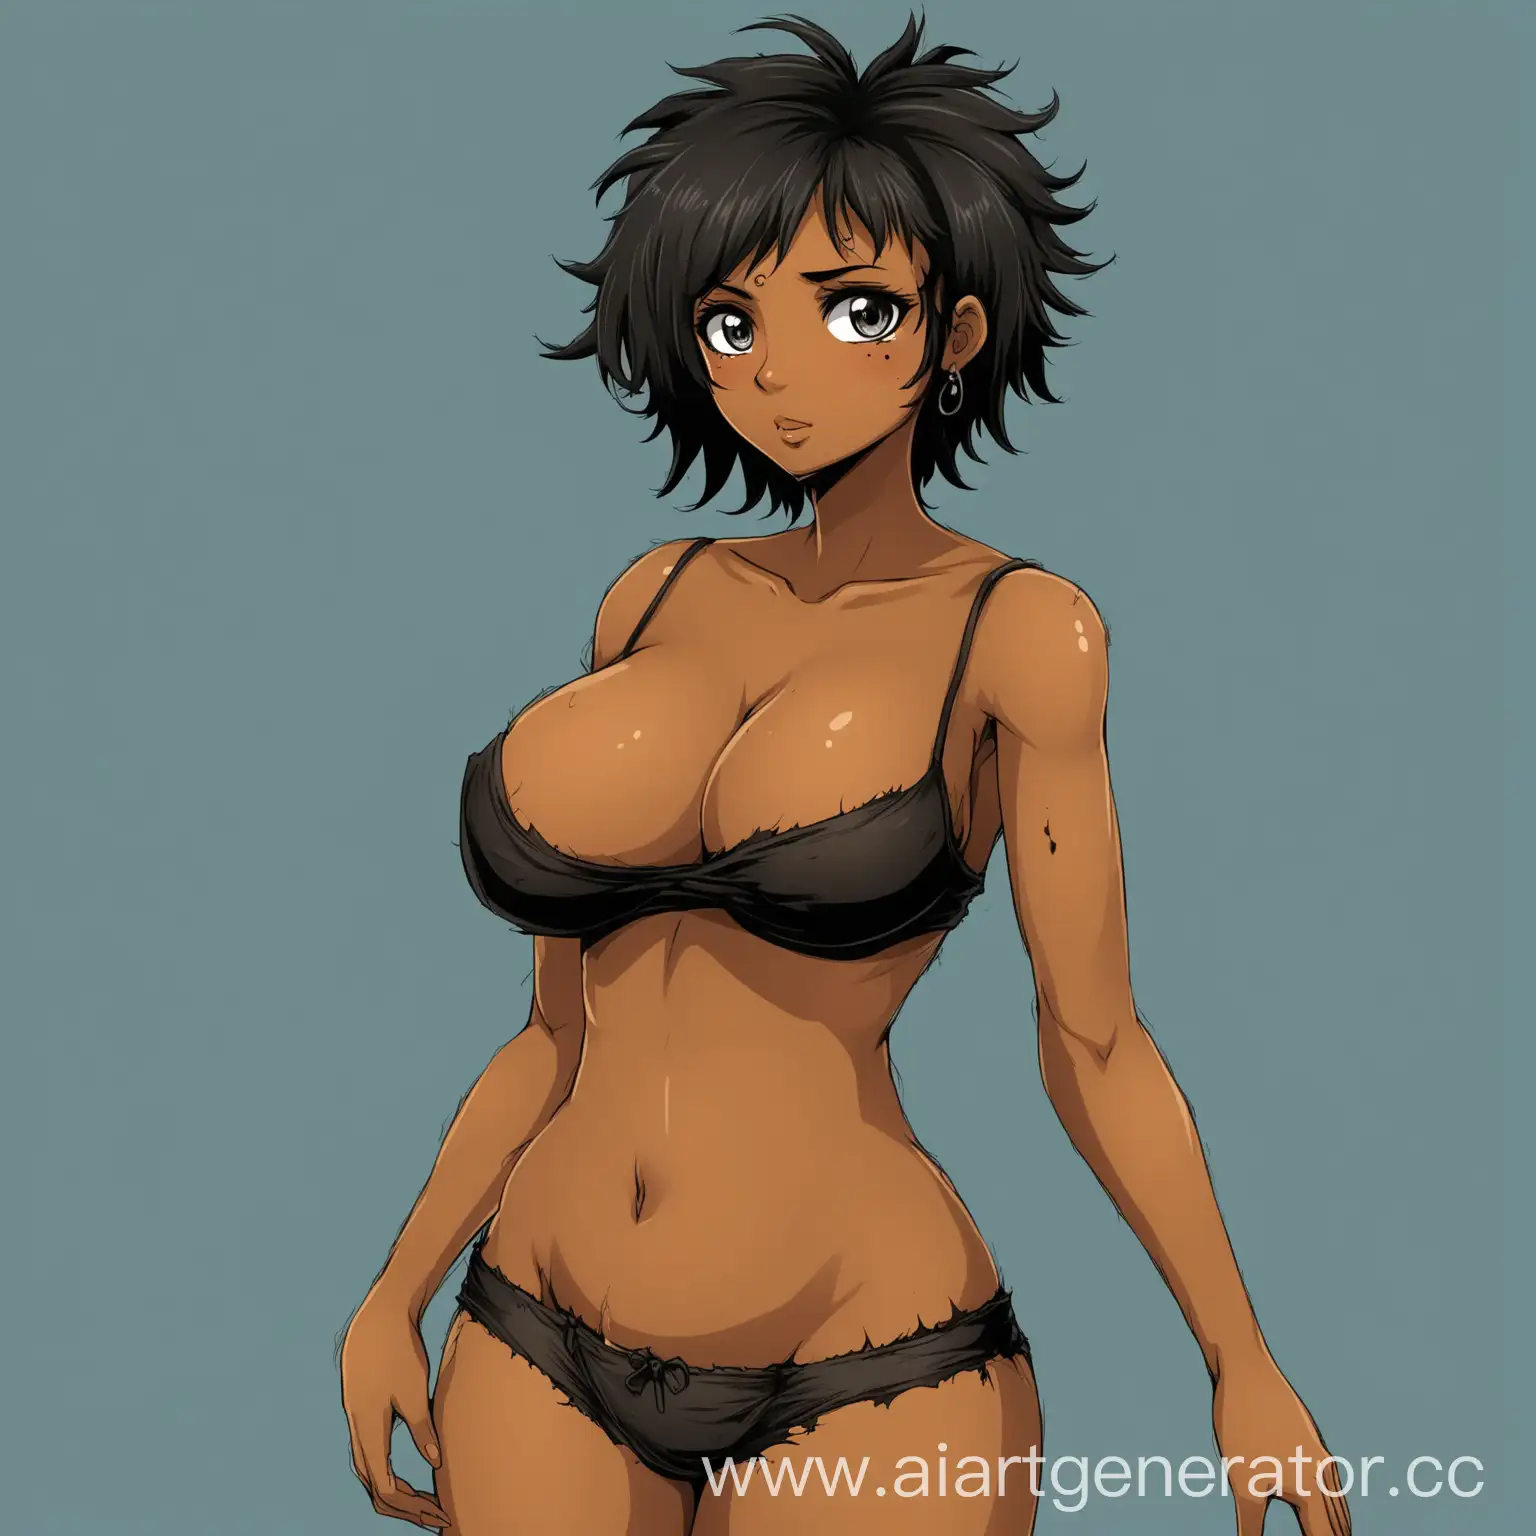 anime style, a girl of about 26 years old, from the Caribbean Islands, a little swarthy, buxom beauty, not too tall, with elastic breasts, hips, short black slightly disheveled hair, shabby slightly torn underwear, with a small mole under the eye